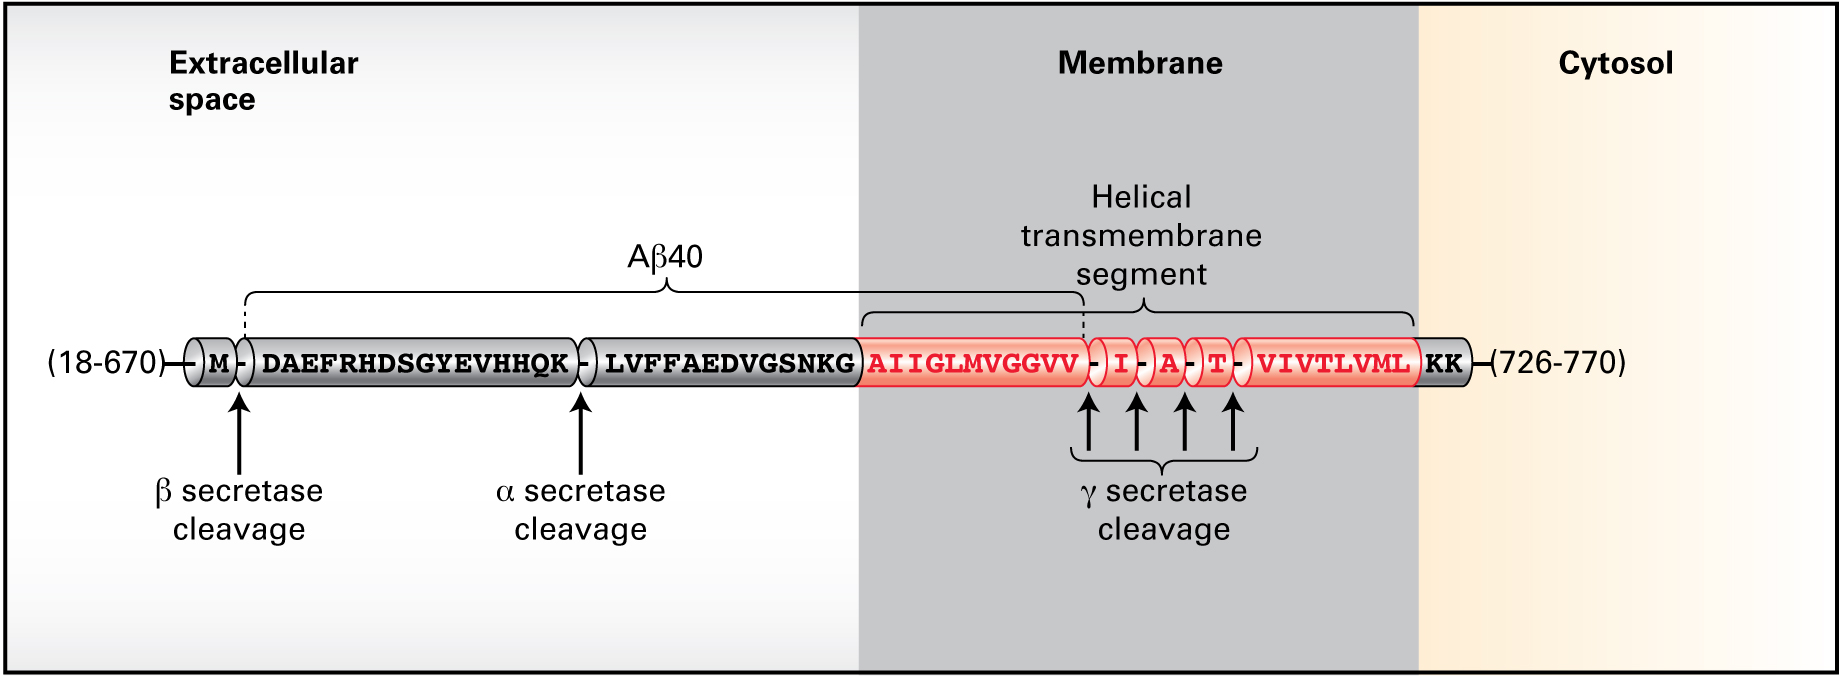 APP cleavage sites, relative to the APP position in the cell membrane. APP can be cleaved in the extracellular domain by  β-secretase or α-secretase. Cleavage by γ-secretase in the helical transmembrane segment may occur at any of four sites, denoted by slashes: AIIGLMVGGVV/I/A/T/VIVTLVML